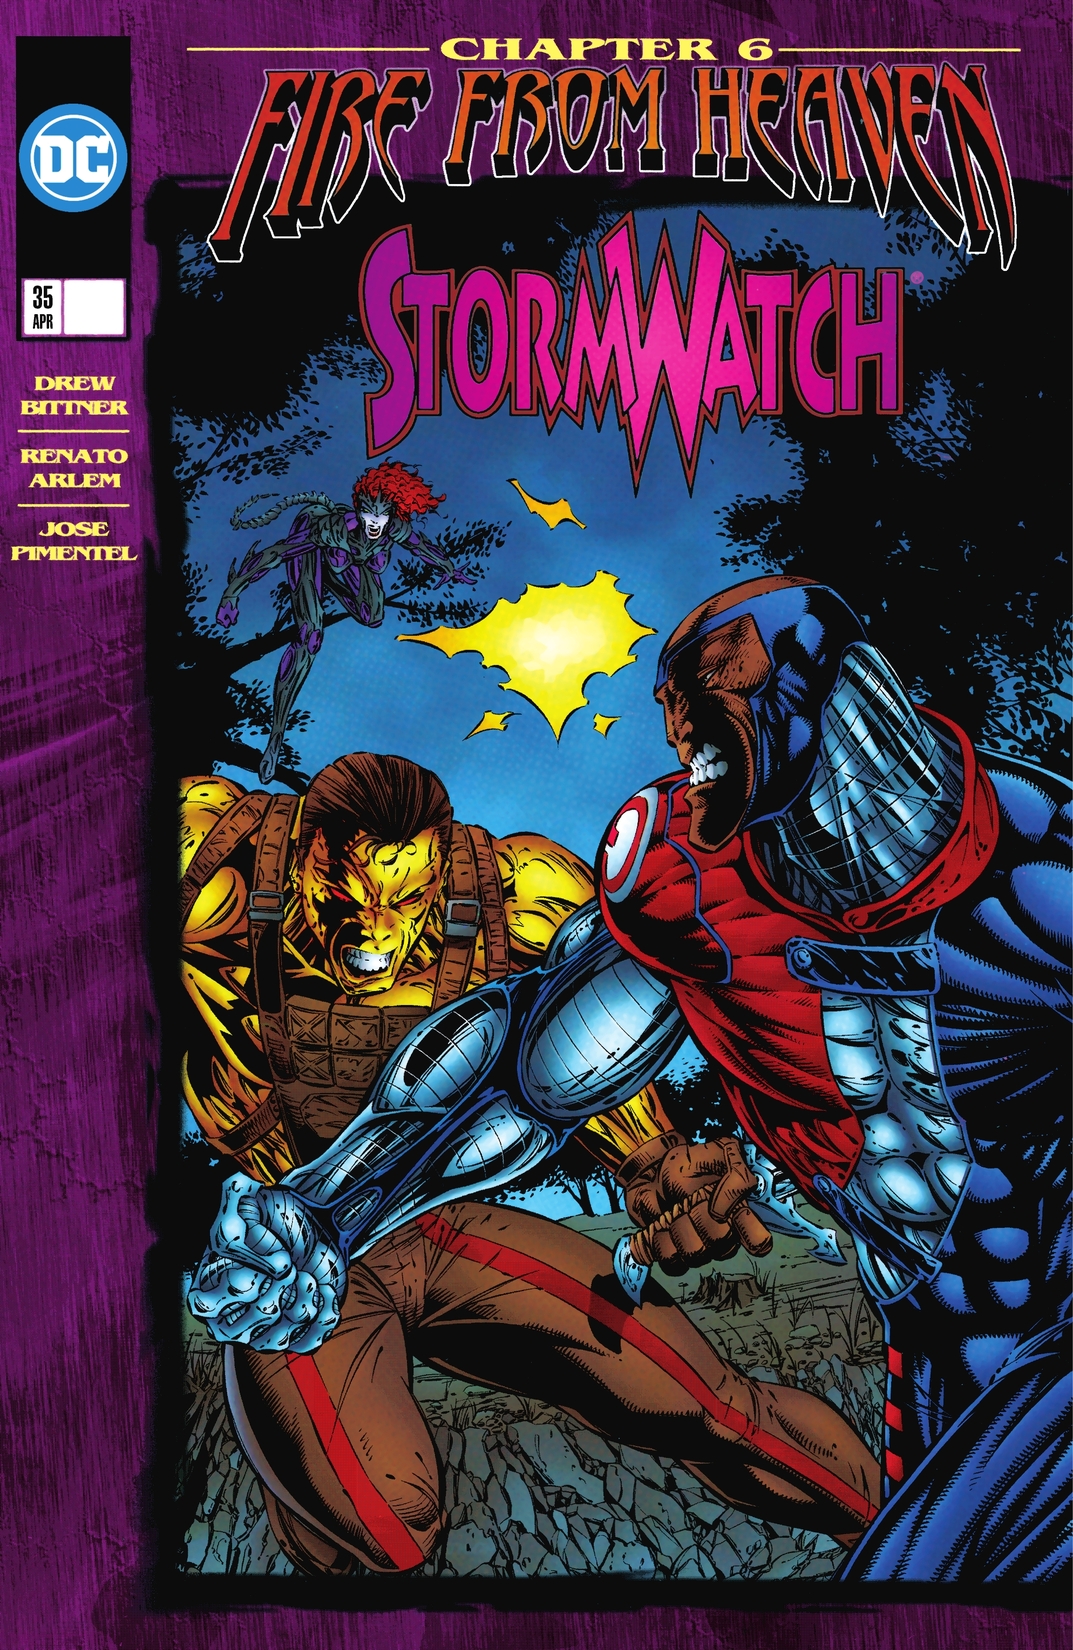 Stormwatch (1993-1997) #35 preview images